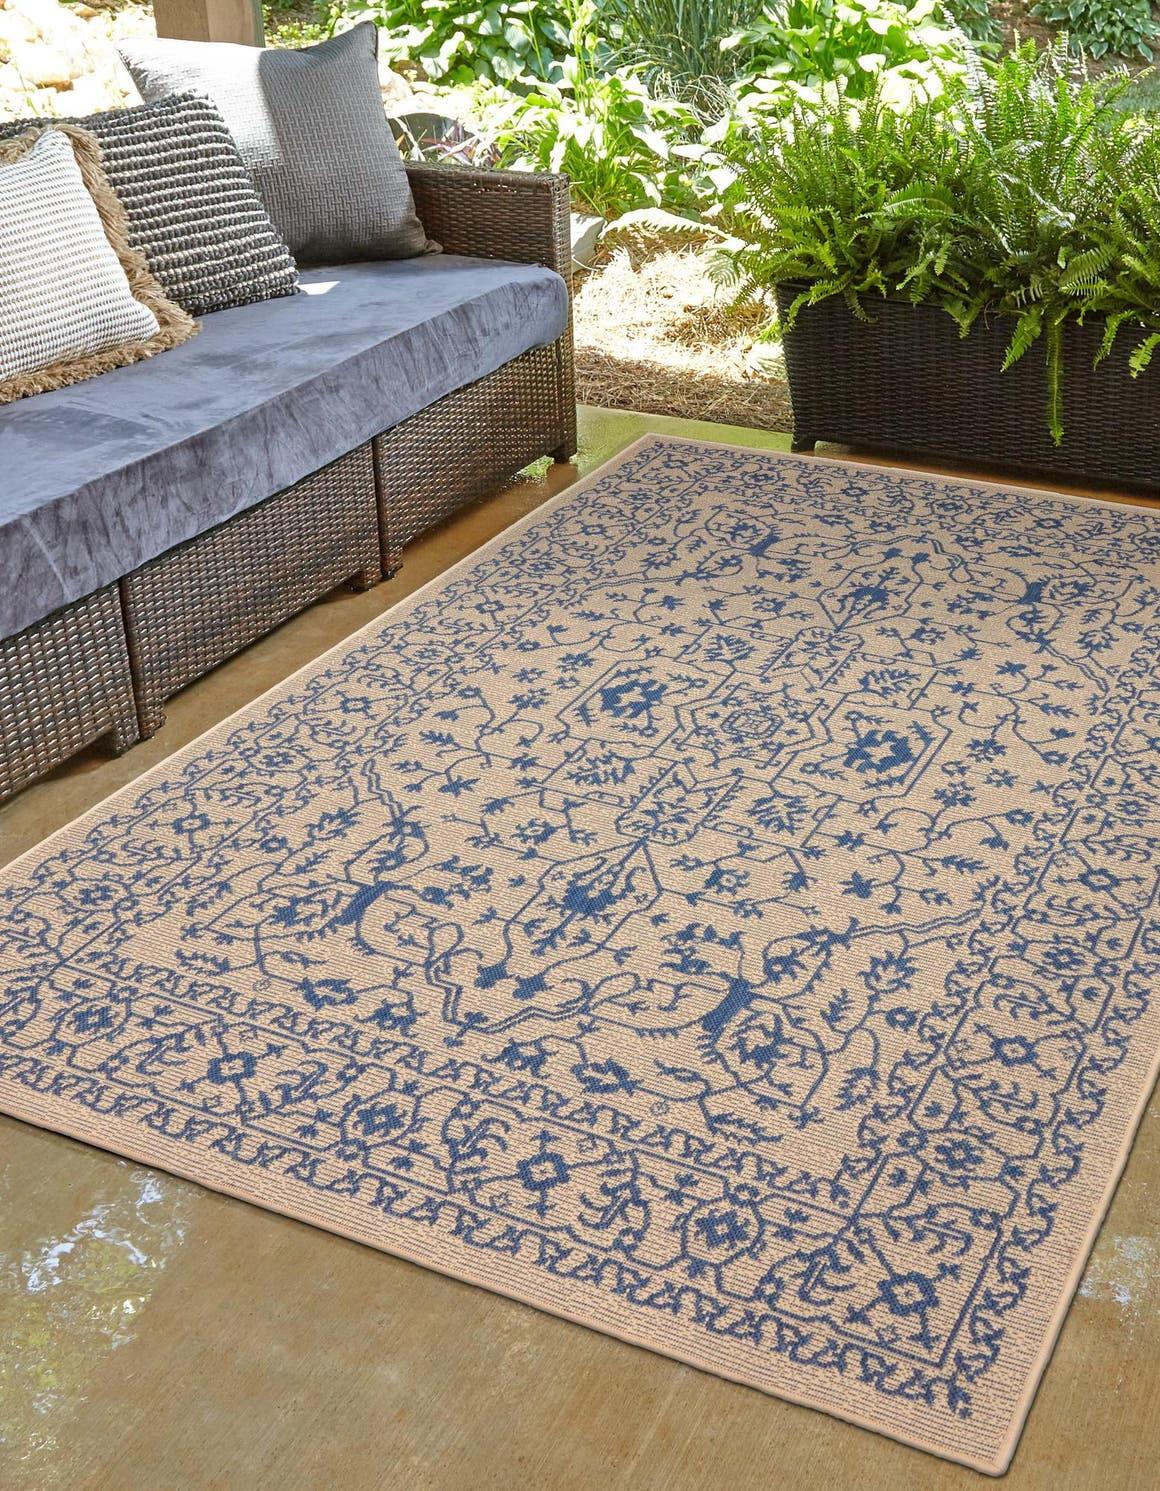 Beige and Blue Synthetic Rectangular Outdoor Rug, Stain-Resistant and Easy Care